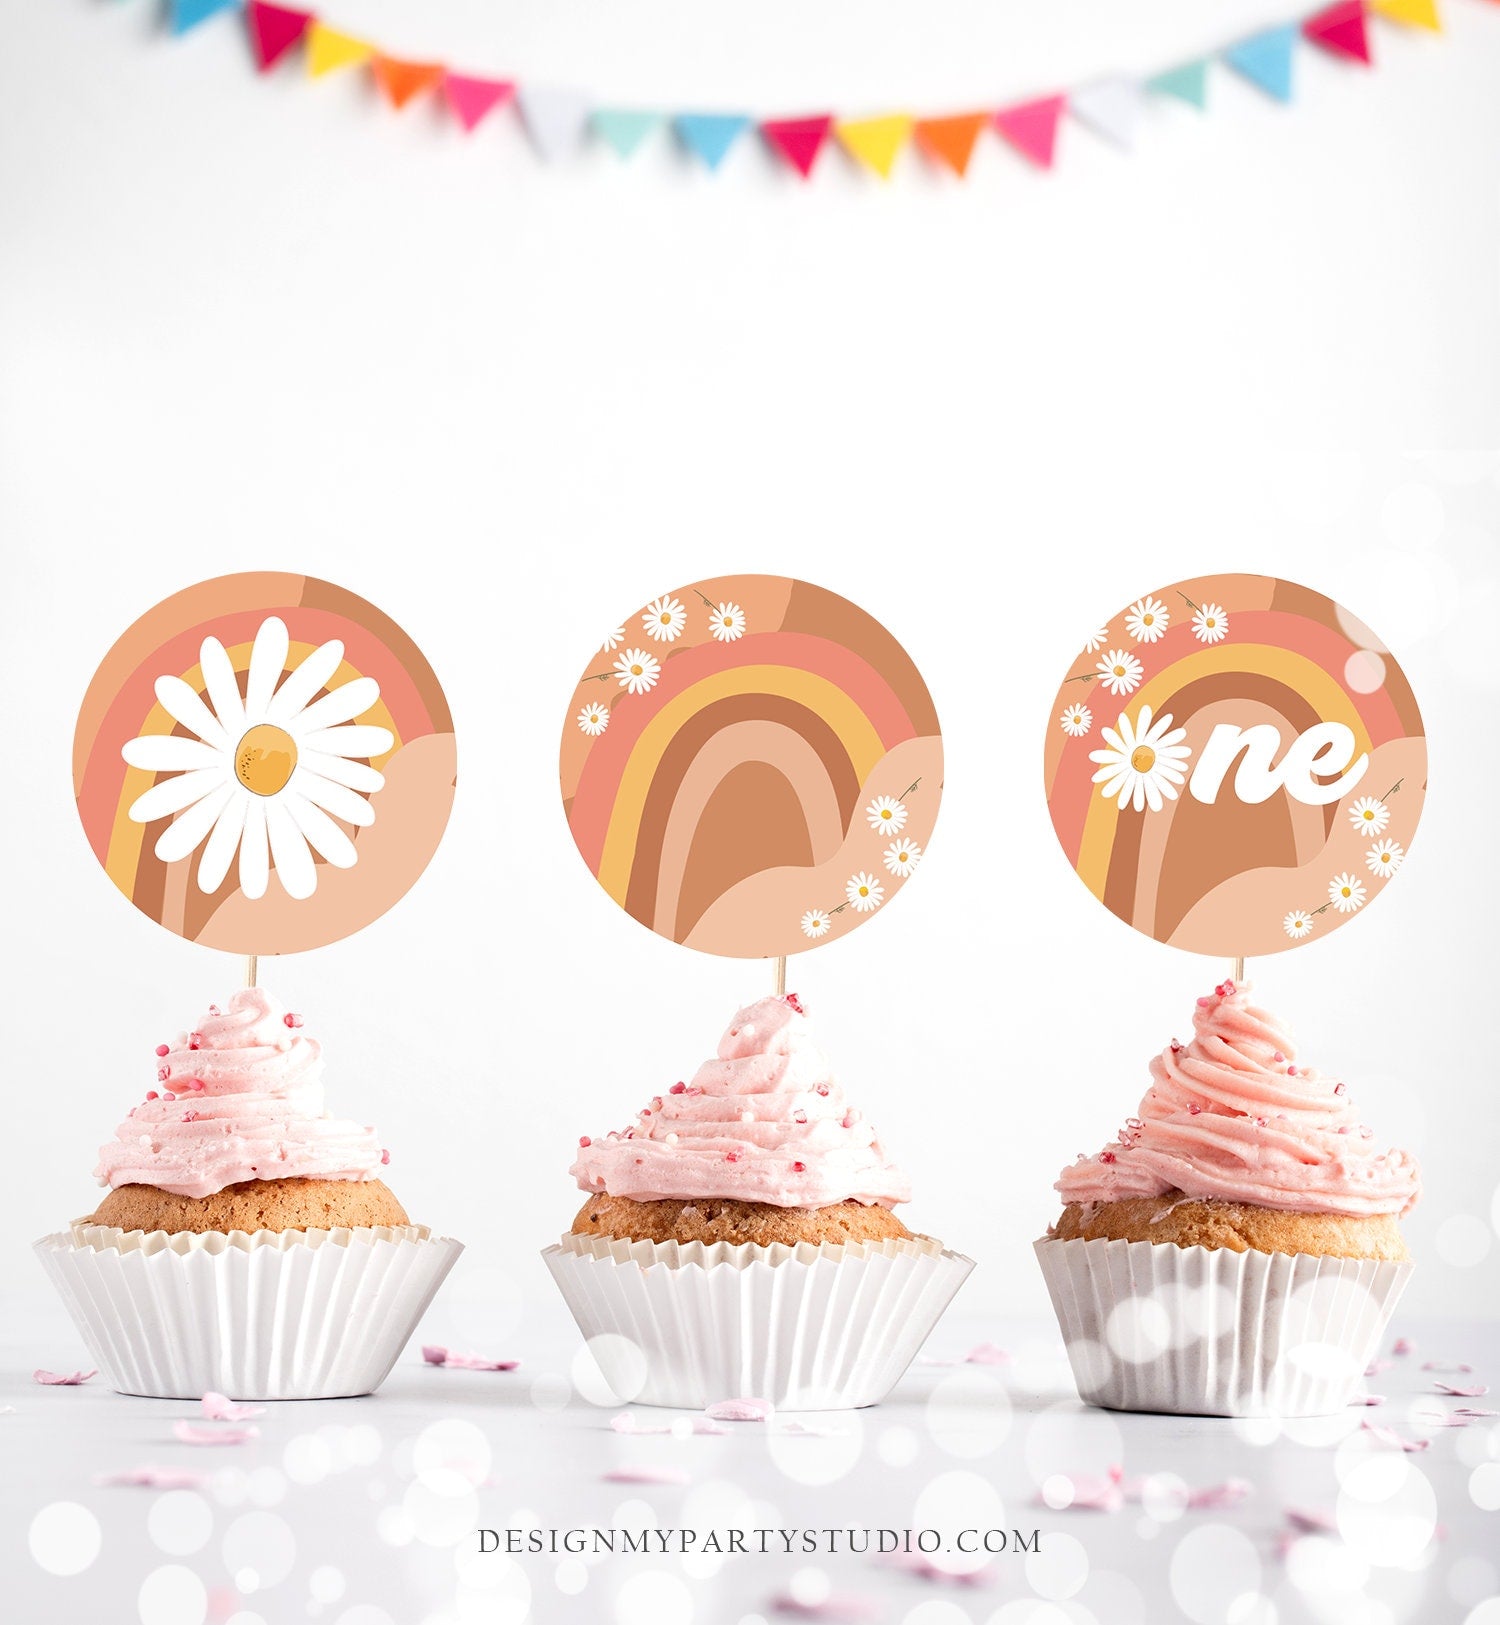 Groovy First Birthday Cupcake Toppers Favor Tags Retro Daisy Birthday Party Decor One Flower Power Festival Download Digital PRINTABLE 0428